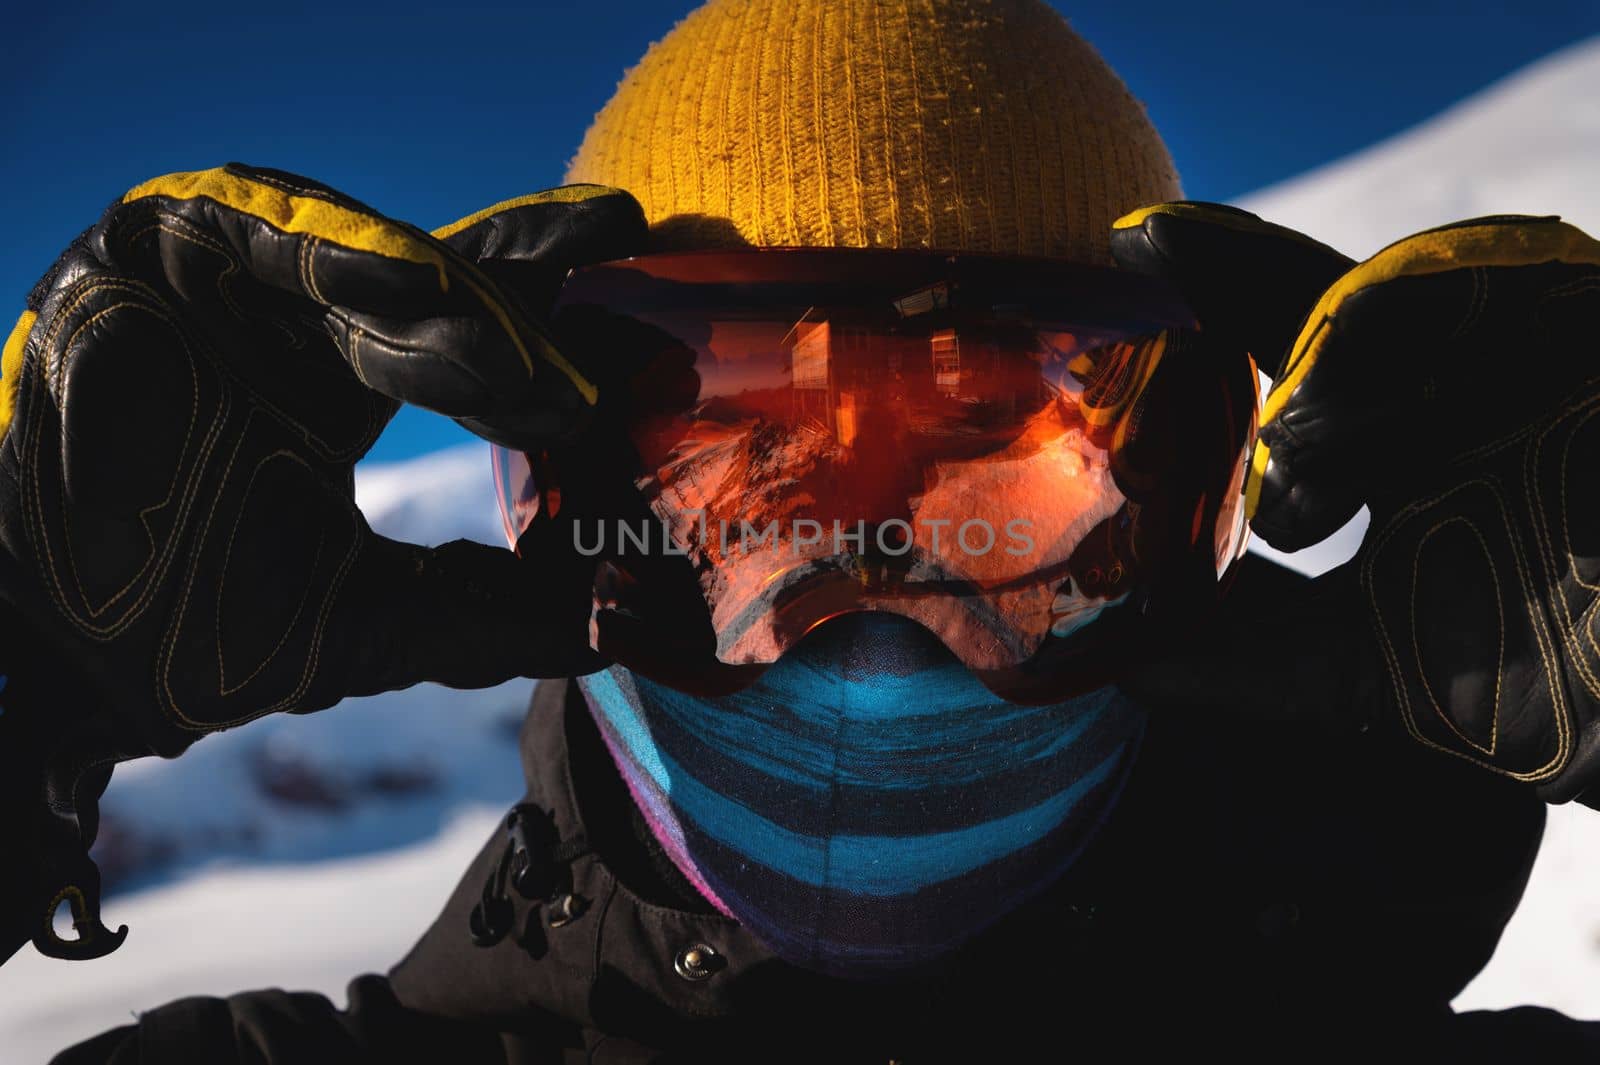 Skier in ski goggles with reflection of snow-capped mountains in them. Portrait of a man in a ski resort against the backdrop of mountains and blue sky by yanik88